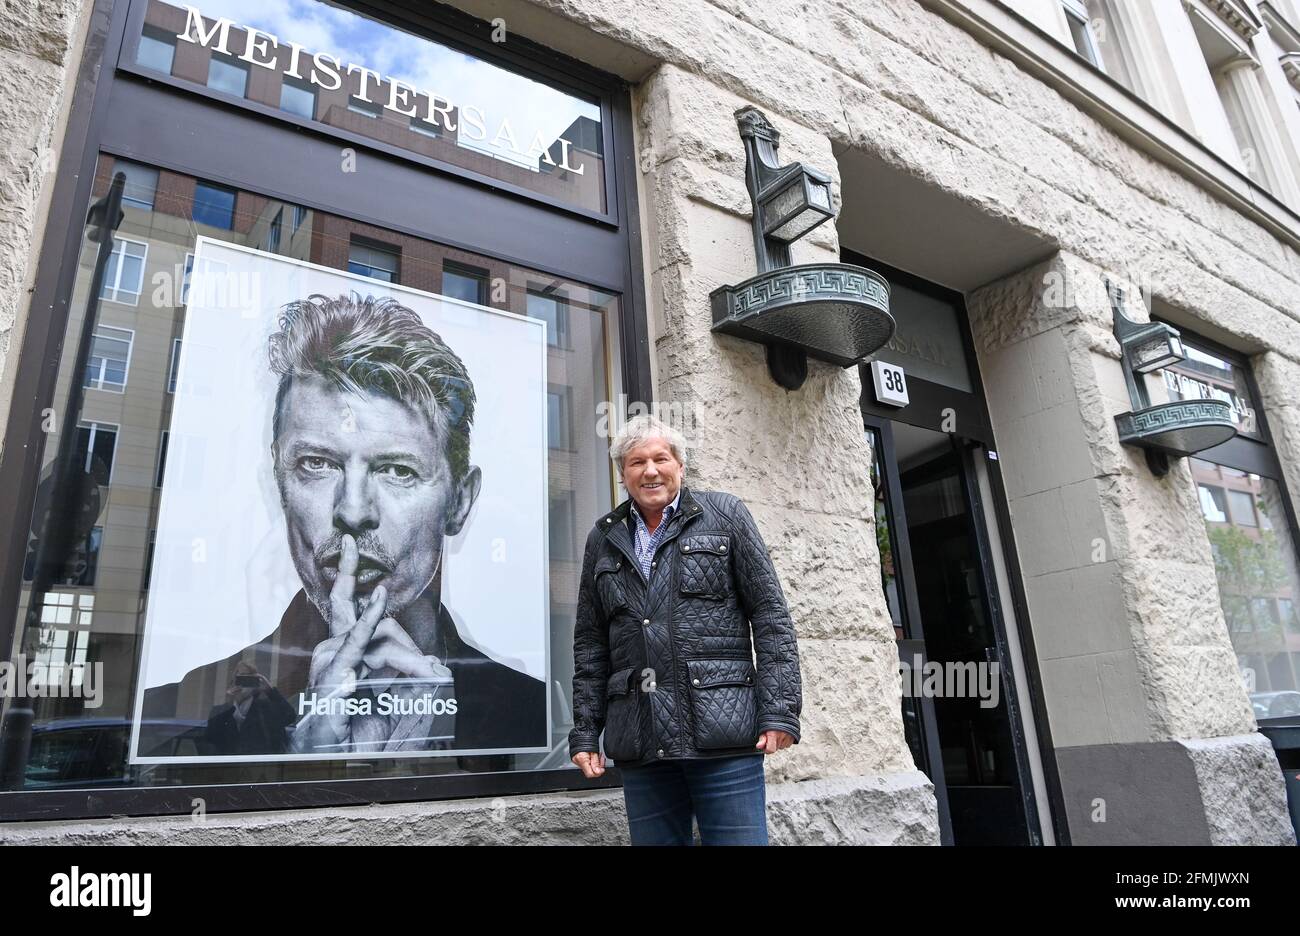 03 May 2021, Berlin: Singer Bernhard Brink stands by a photo of David Bowie  at the entrance to Hansa Studios during a walk. He auditioned here in the  70s and then signed